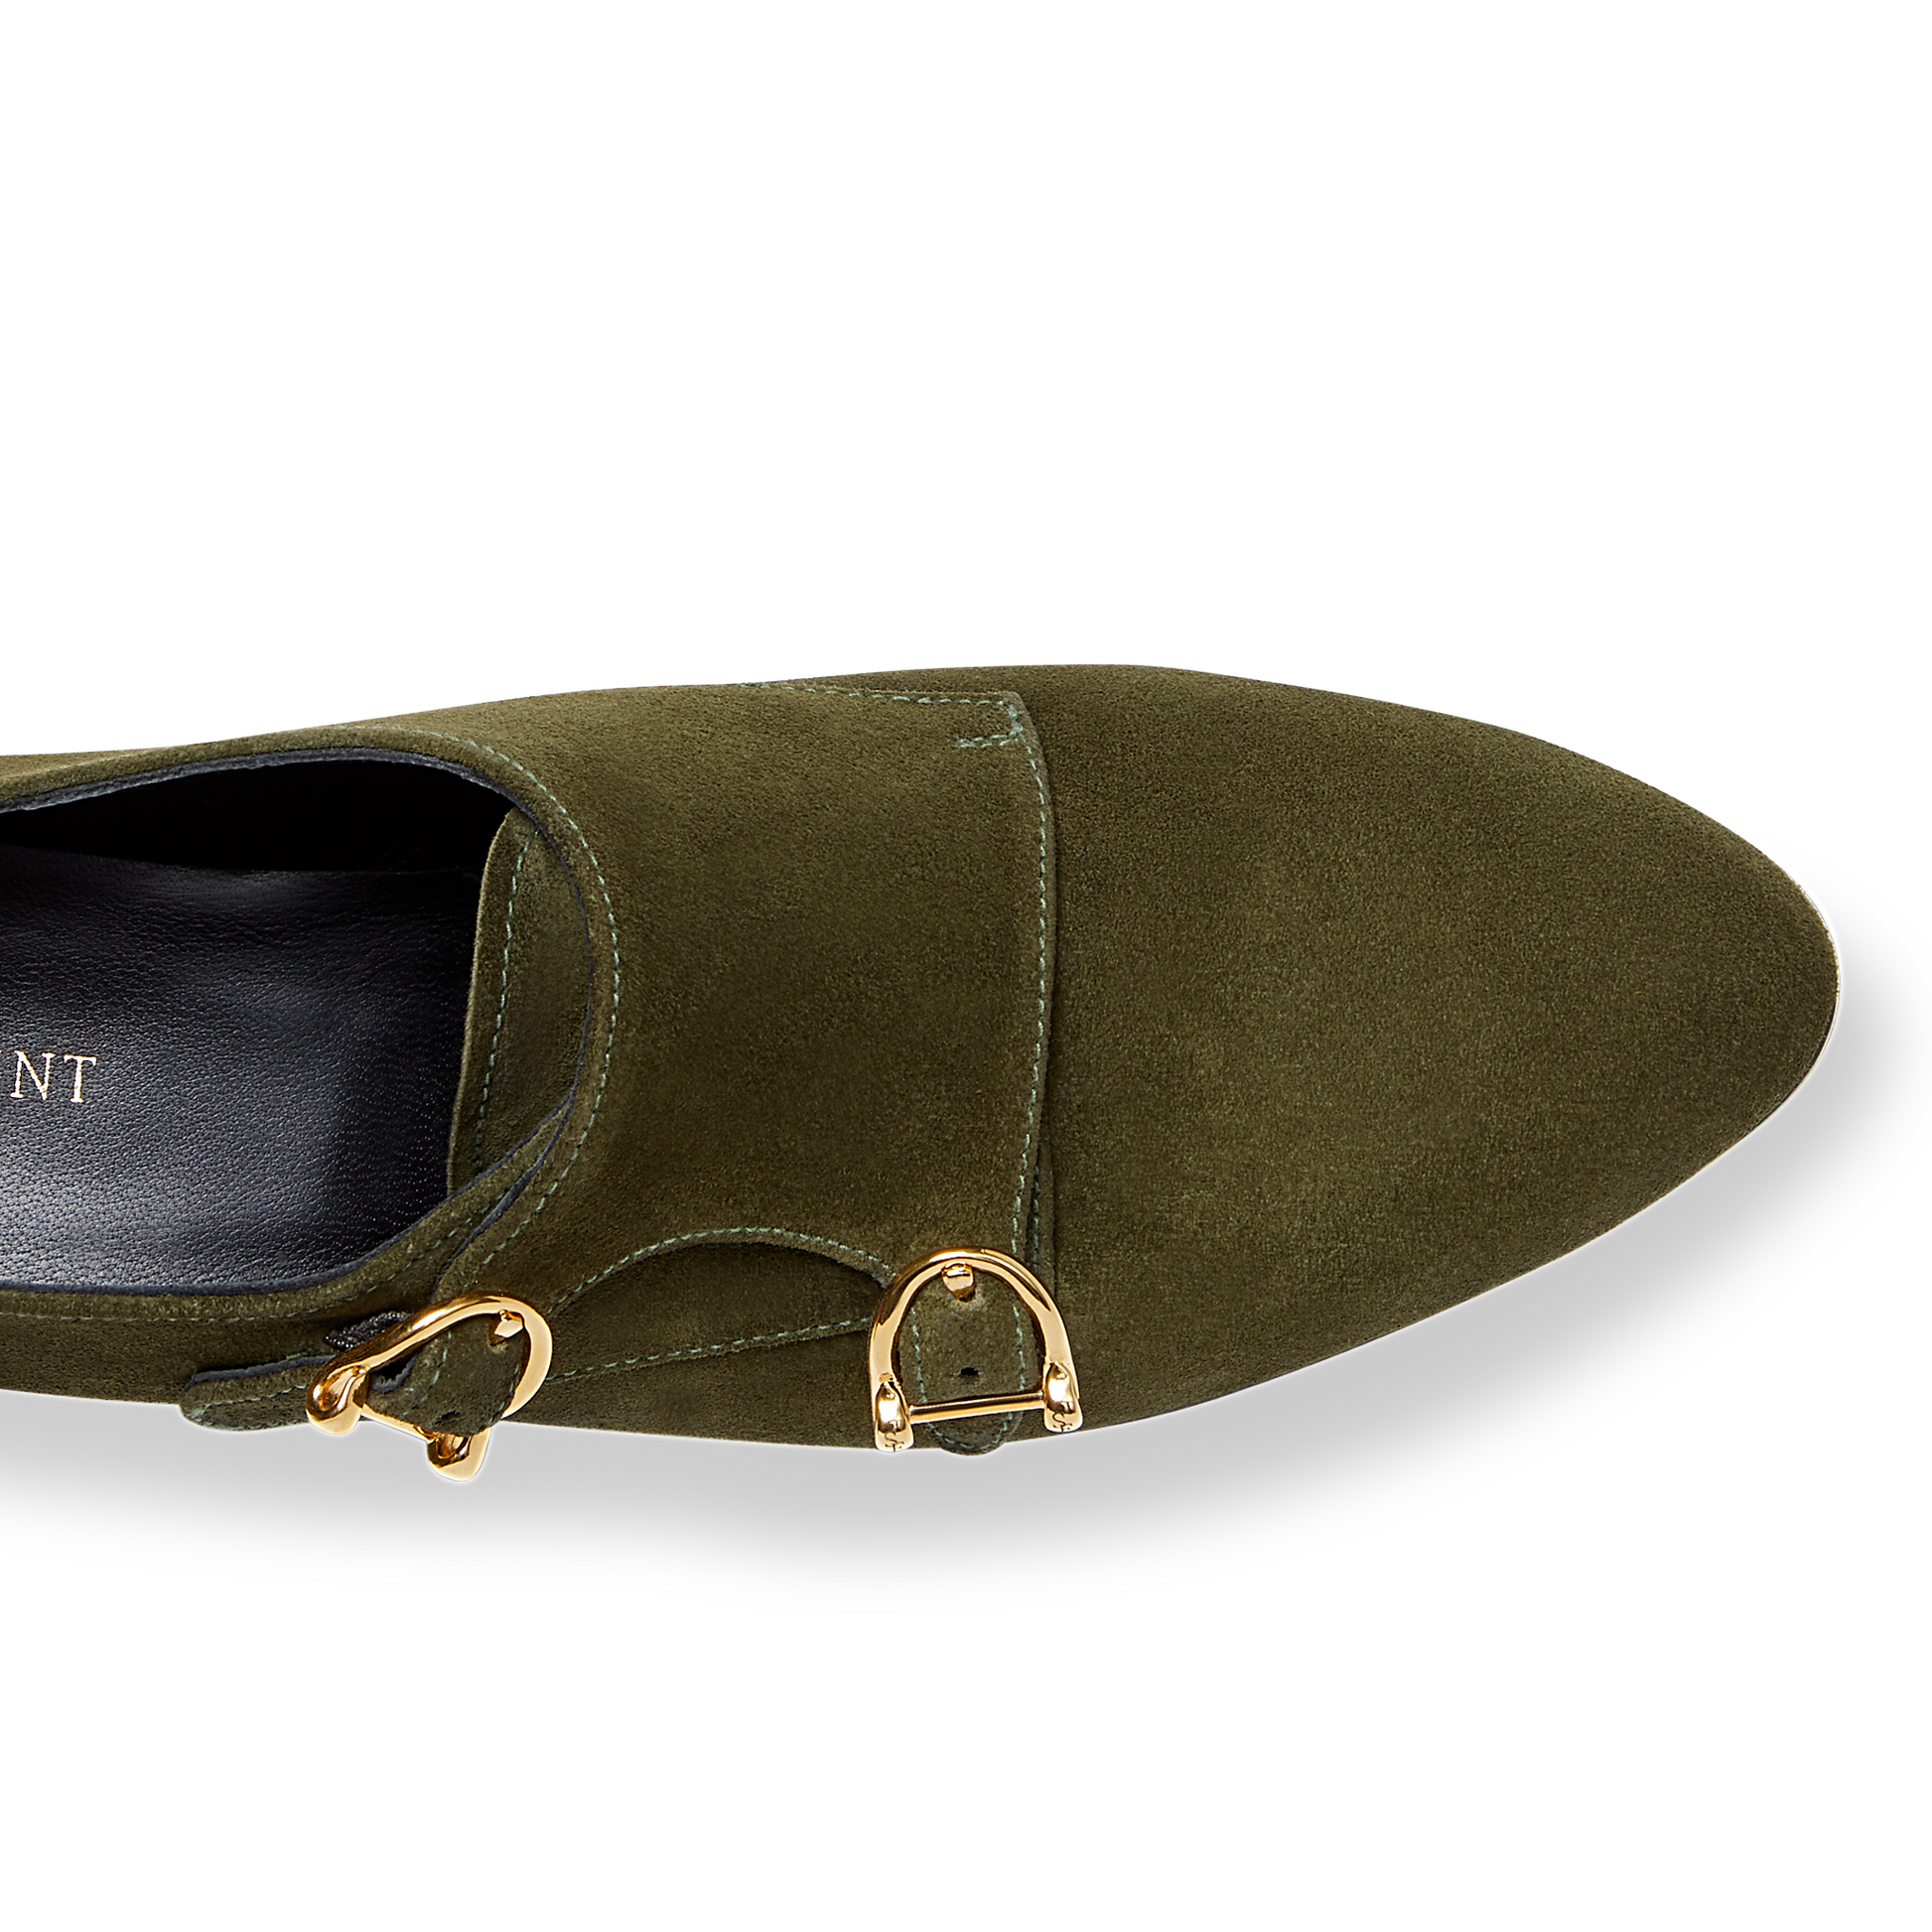 15mm Italian Made Almond Toe Double-monk strap Loafer Flat in Olive Crosta